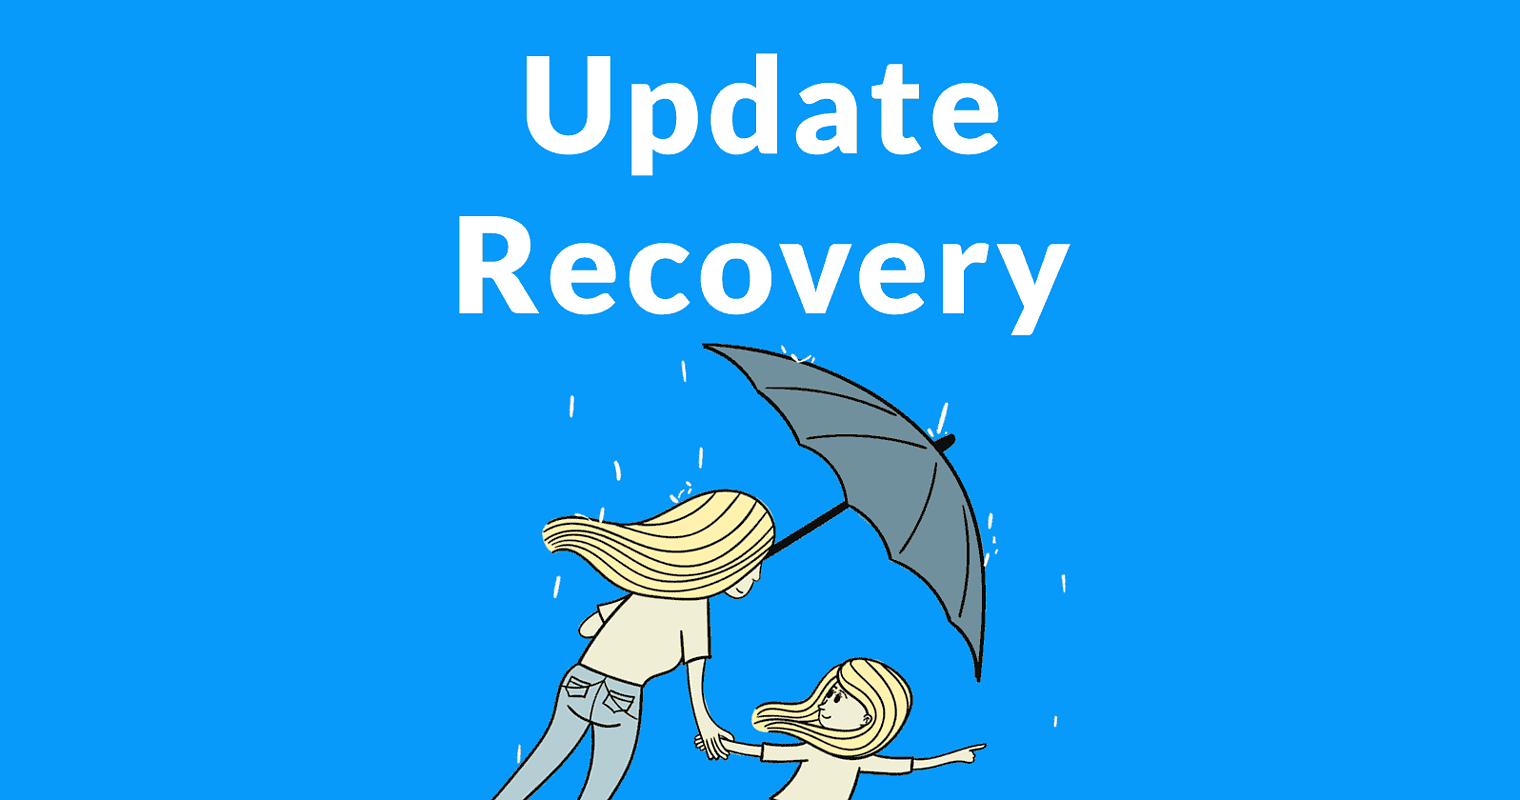 Recovery From November 2019 Google Update